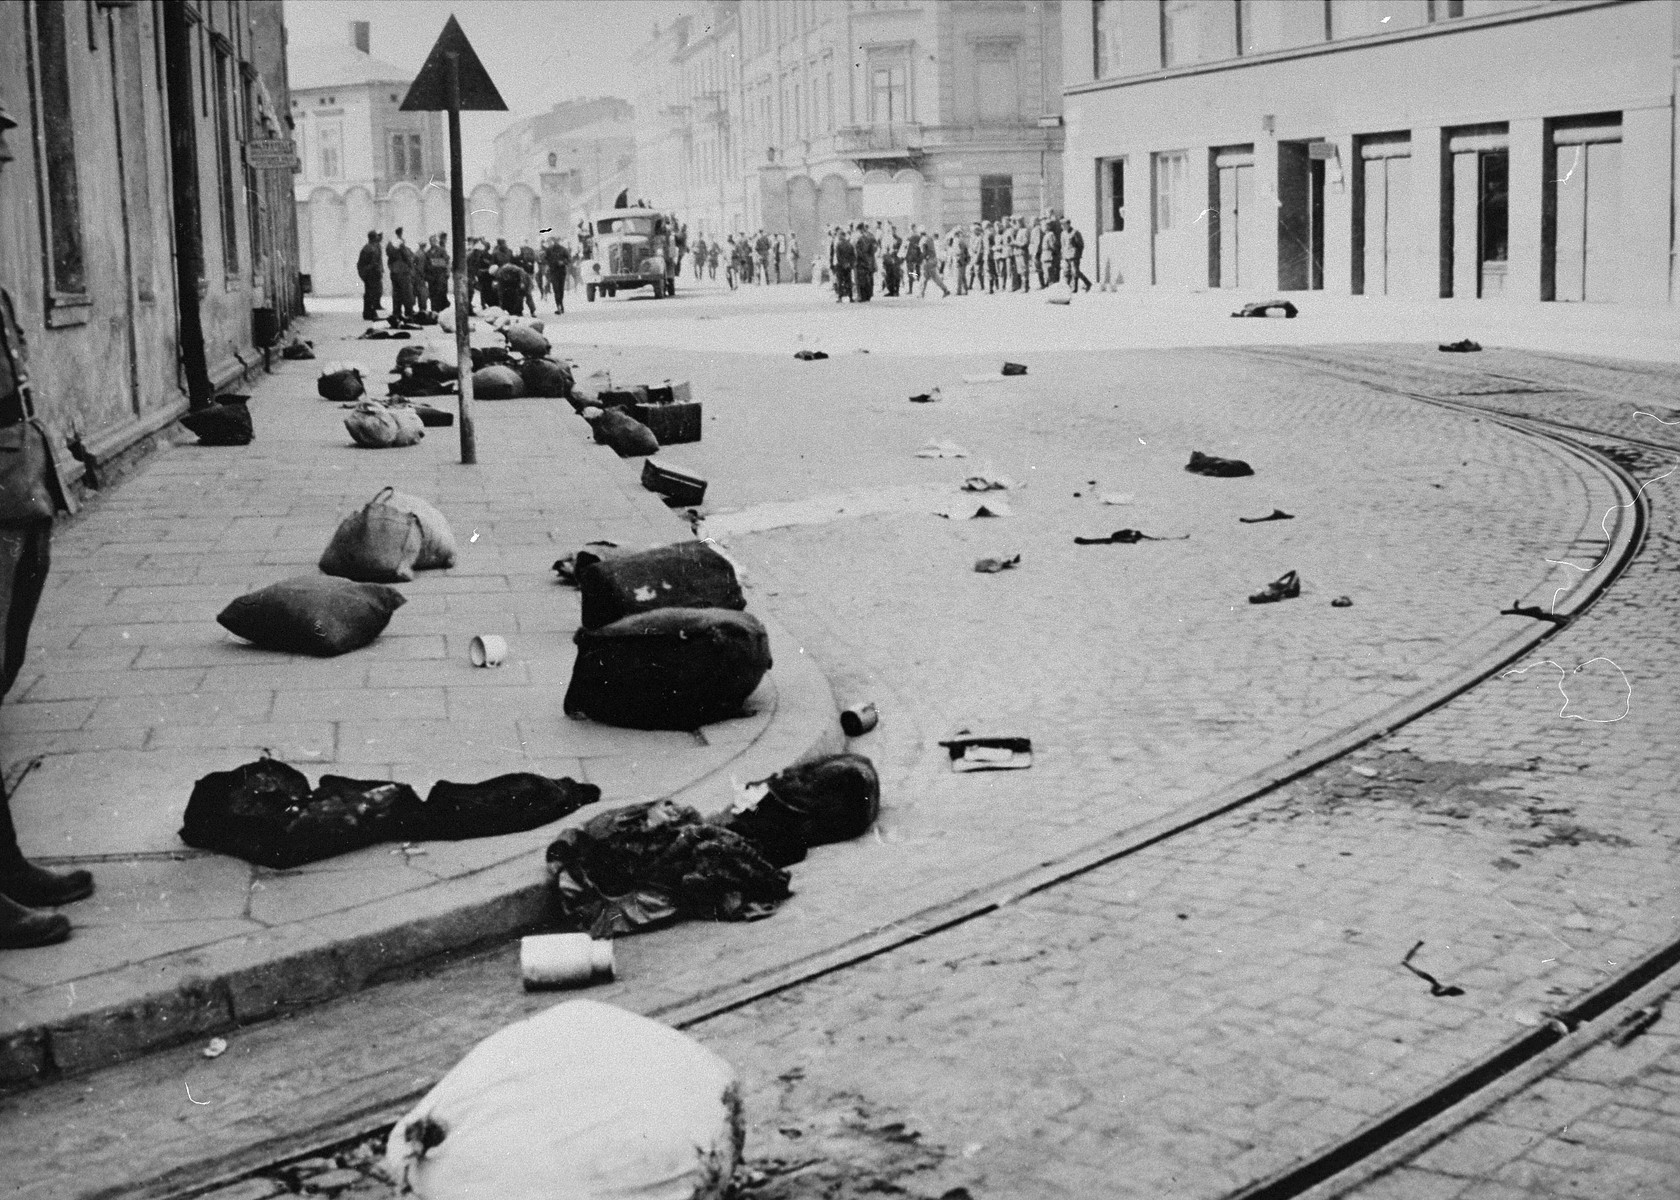 View of a major street in Krakow after the liquidation of the ghetto, which is strewn with the bundles of deported Jews.